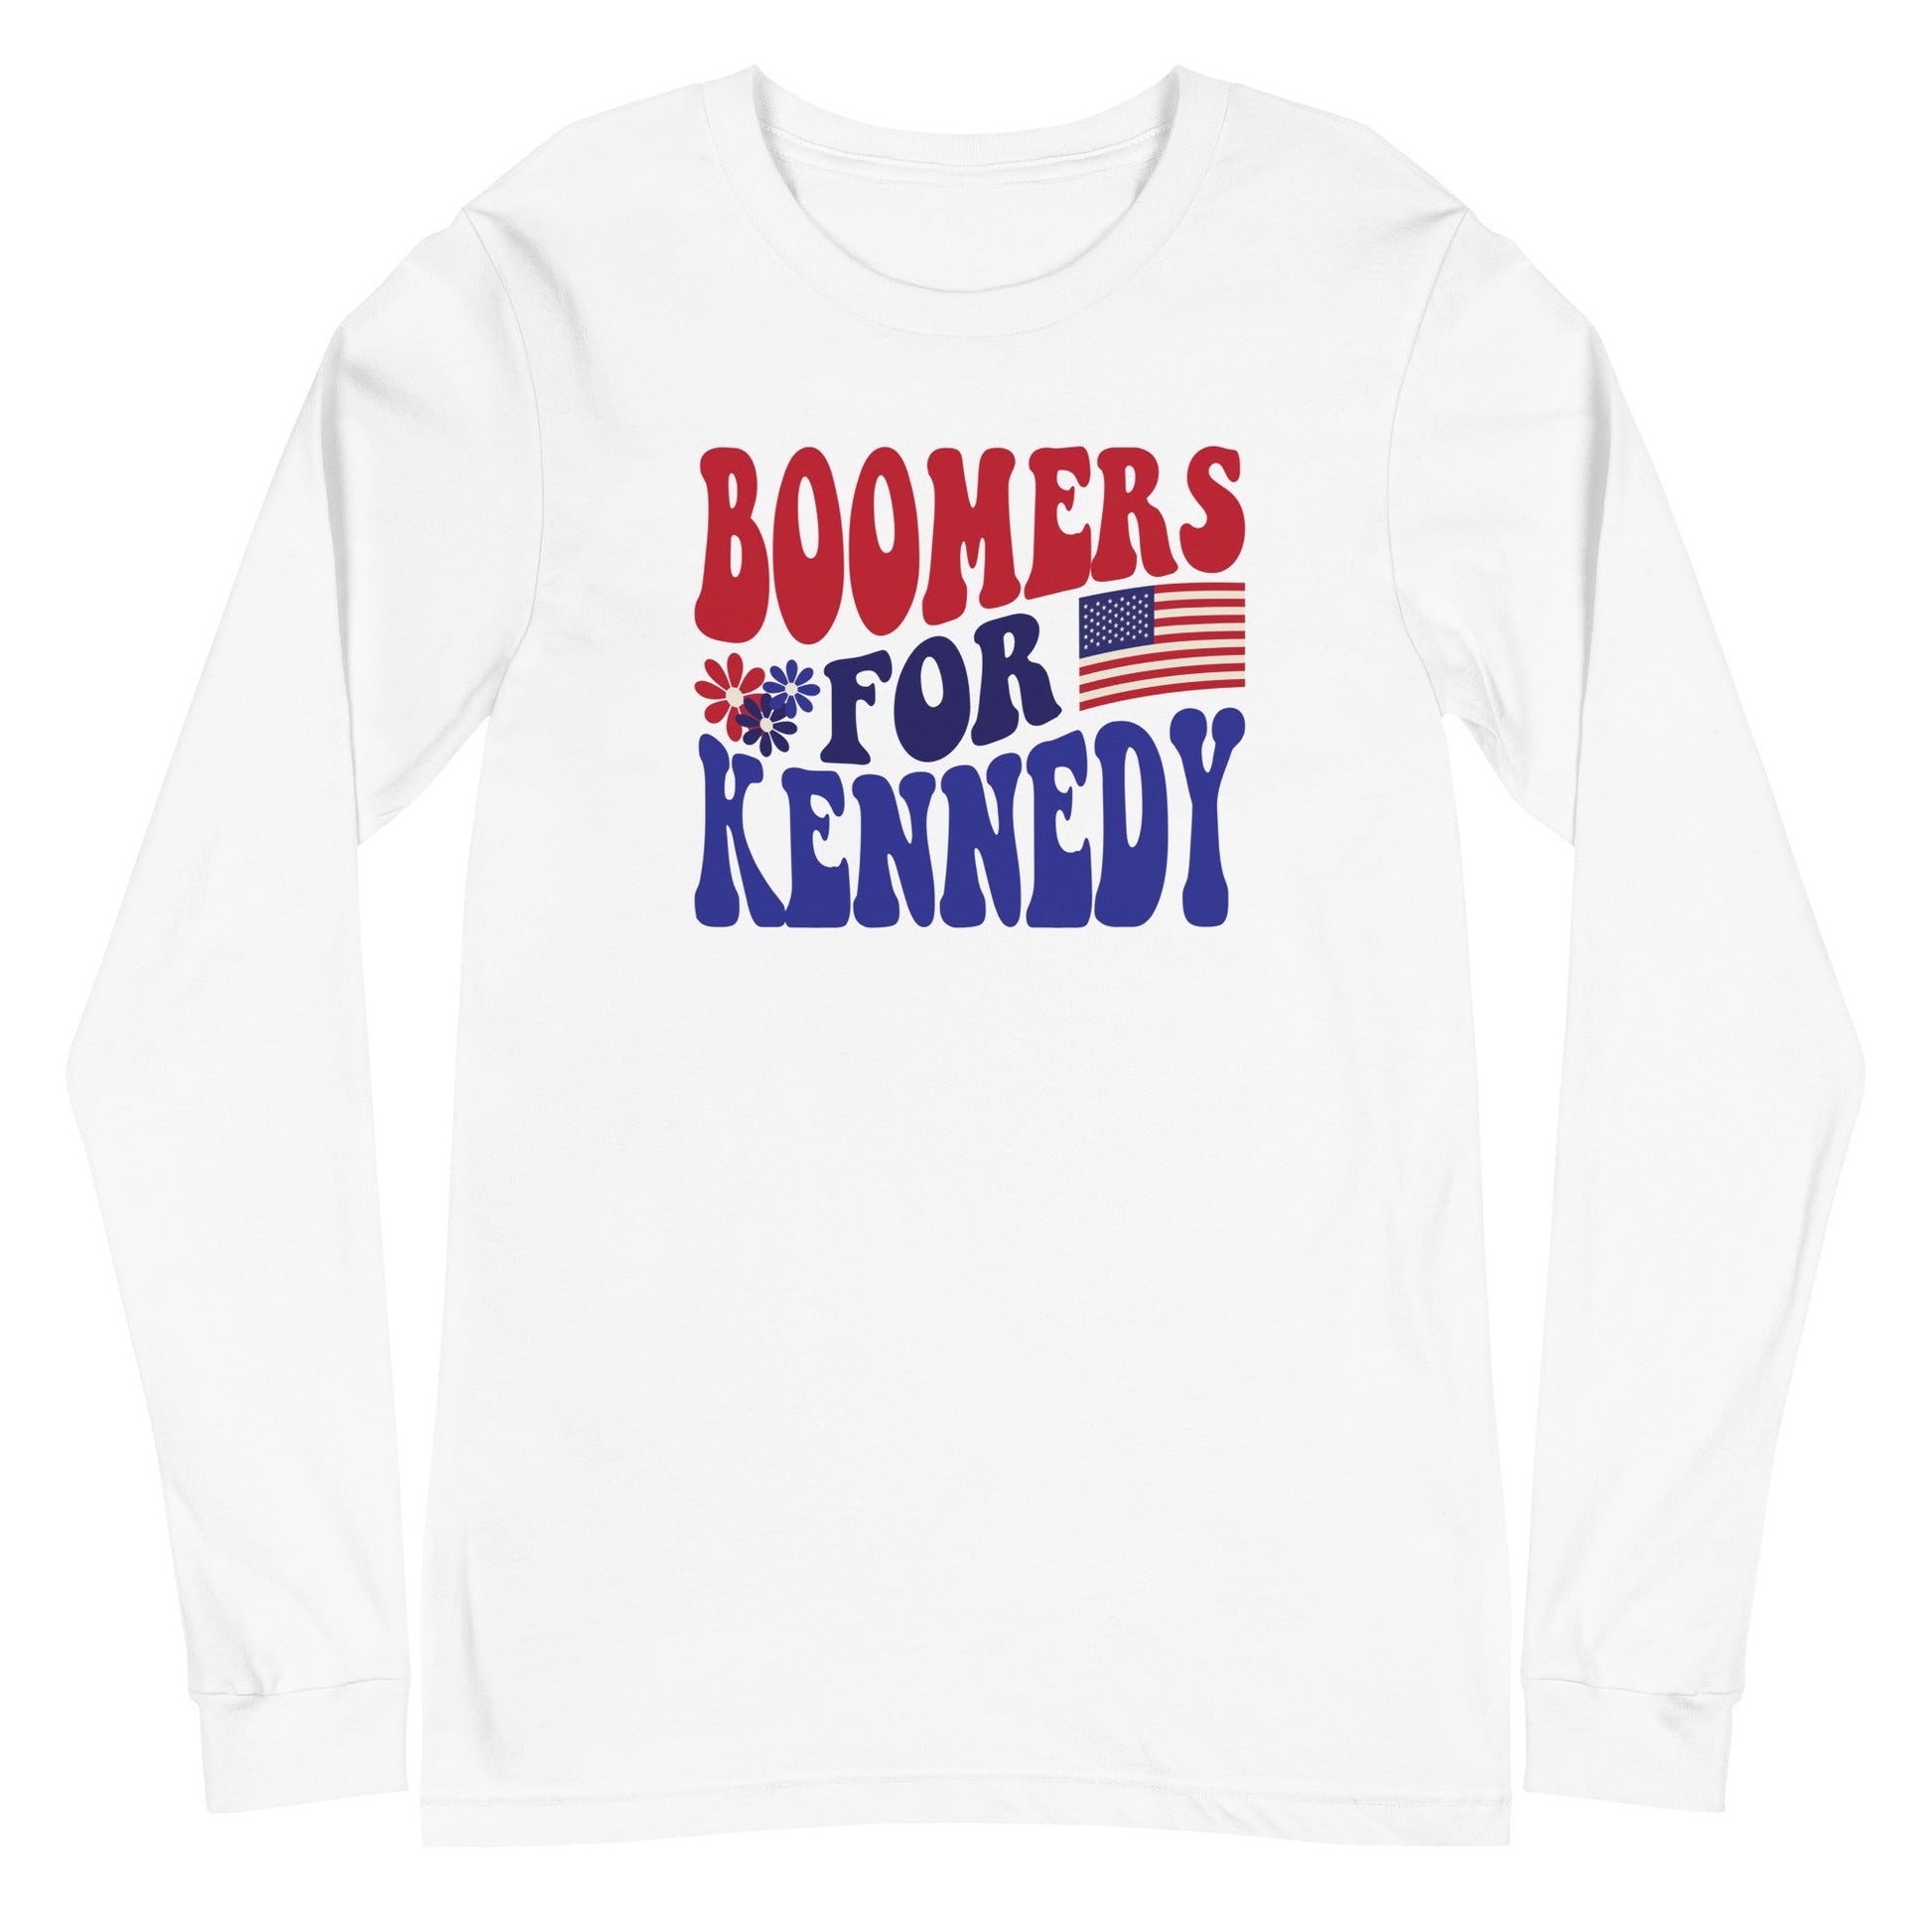 Boomers for Kennedy Unisex Long Sleeve Tee - TEAM KENNEDY. All rights reserved